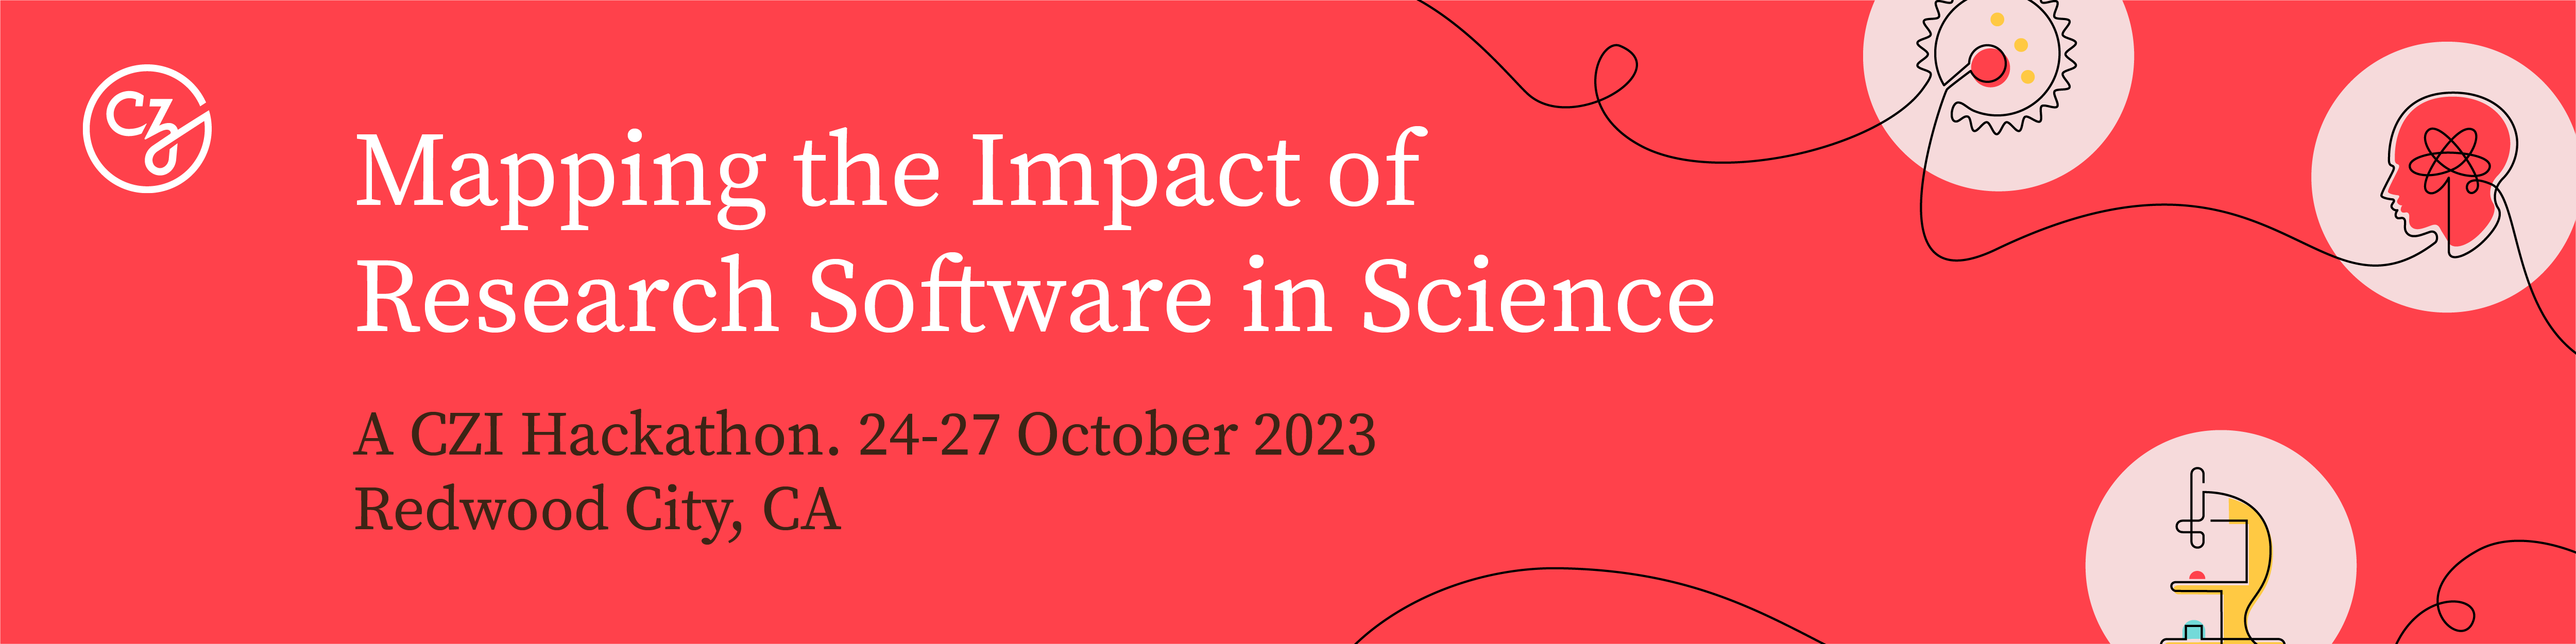 Mapping the Impact of Research Software in Science - banner